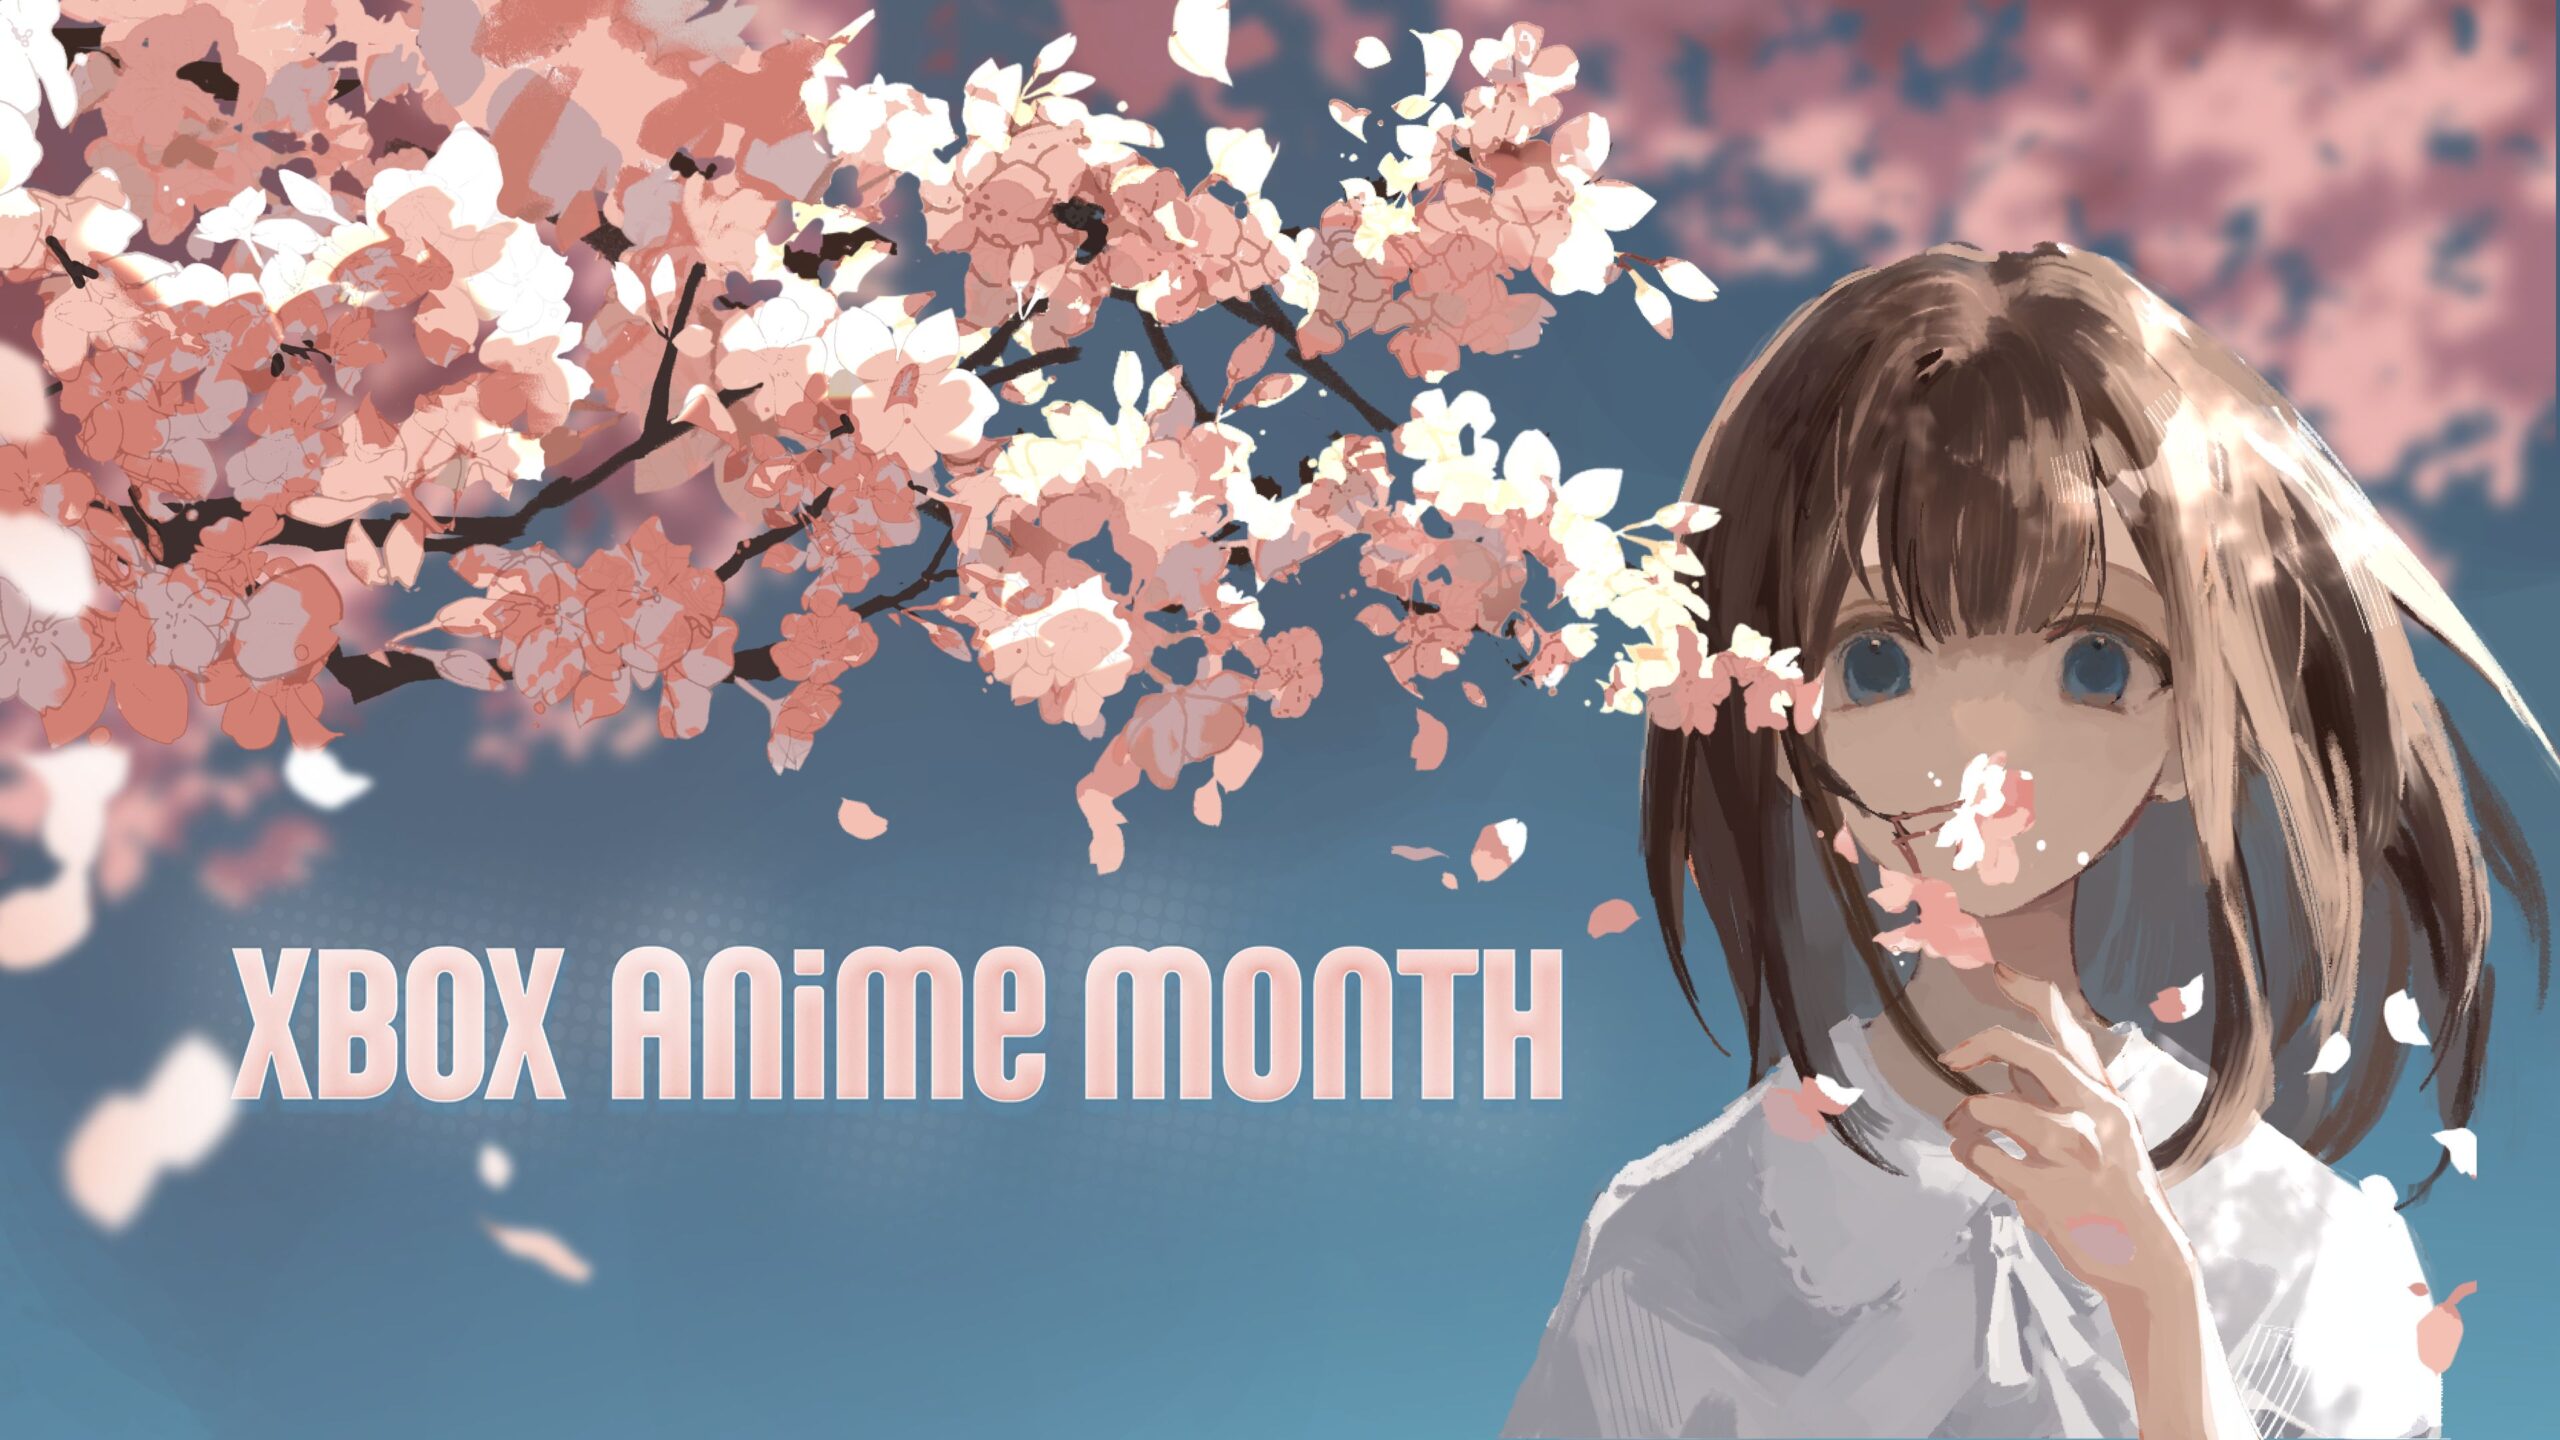 Xbox Anime Month Returns with Great Discounts on Games and Movies